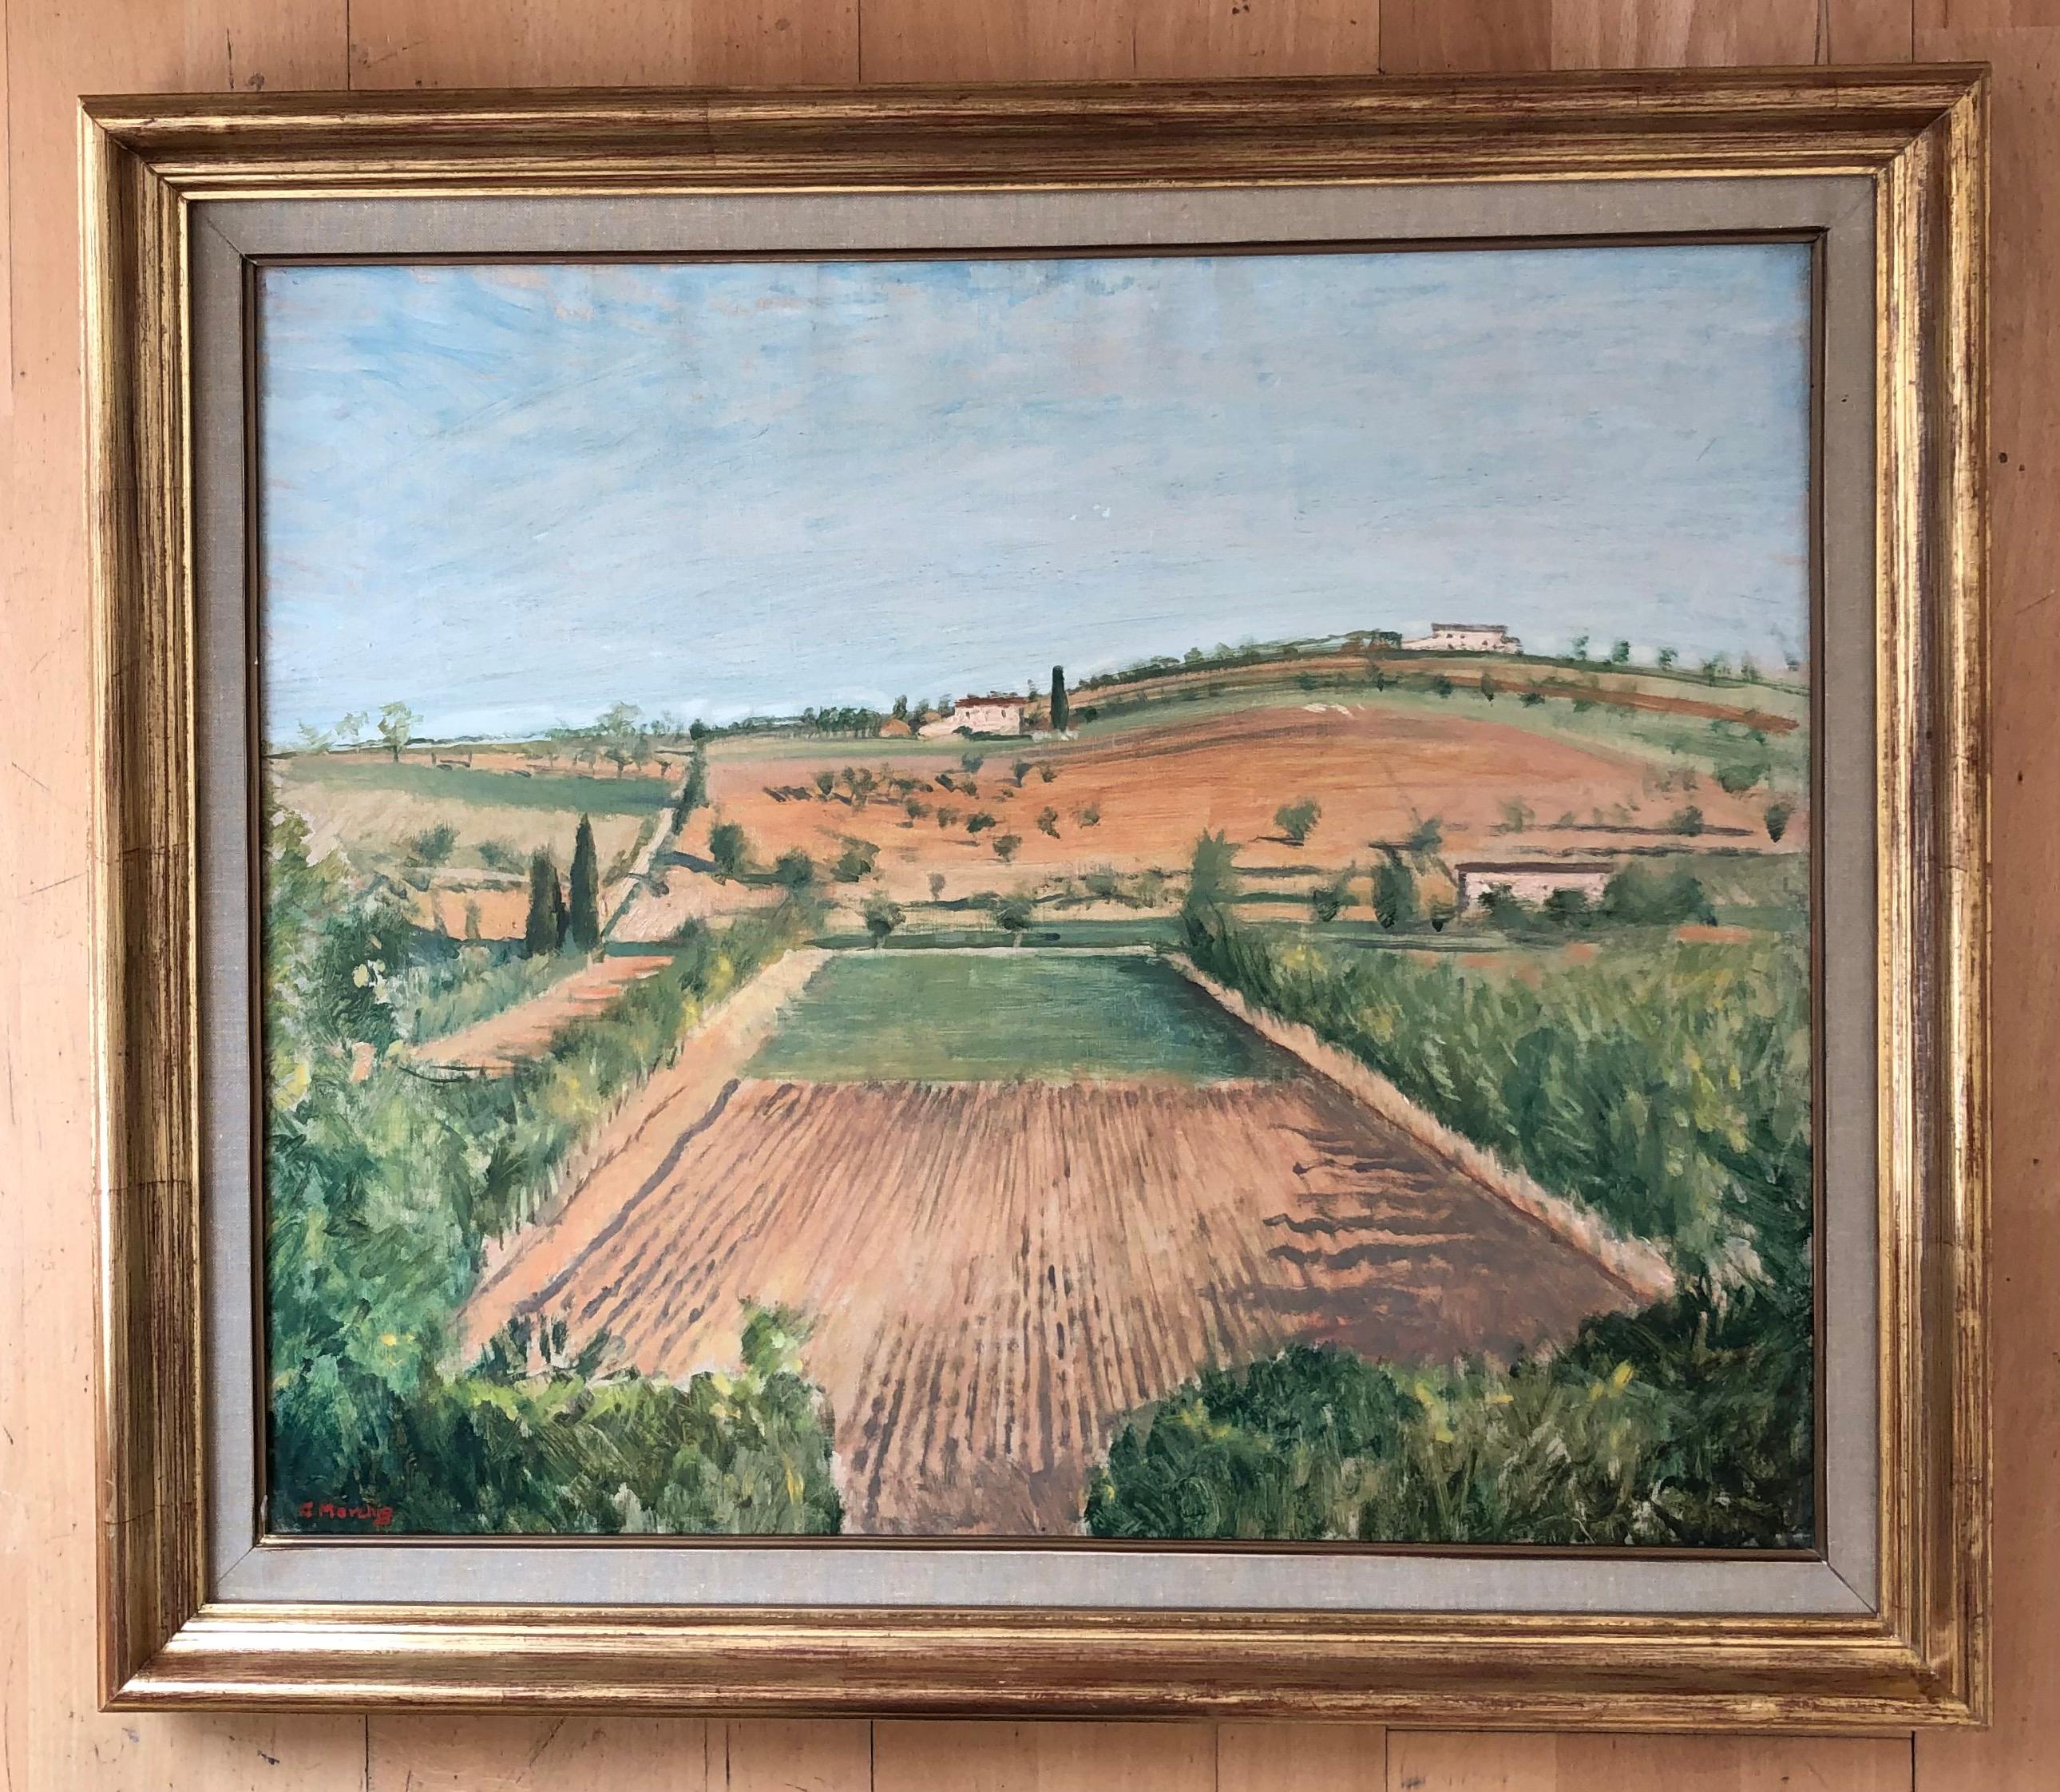 Paesaggio di Romagna - Painting by Giannino Marchig